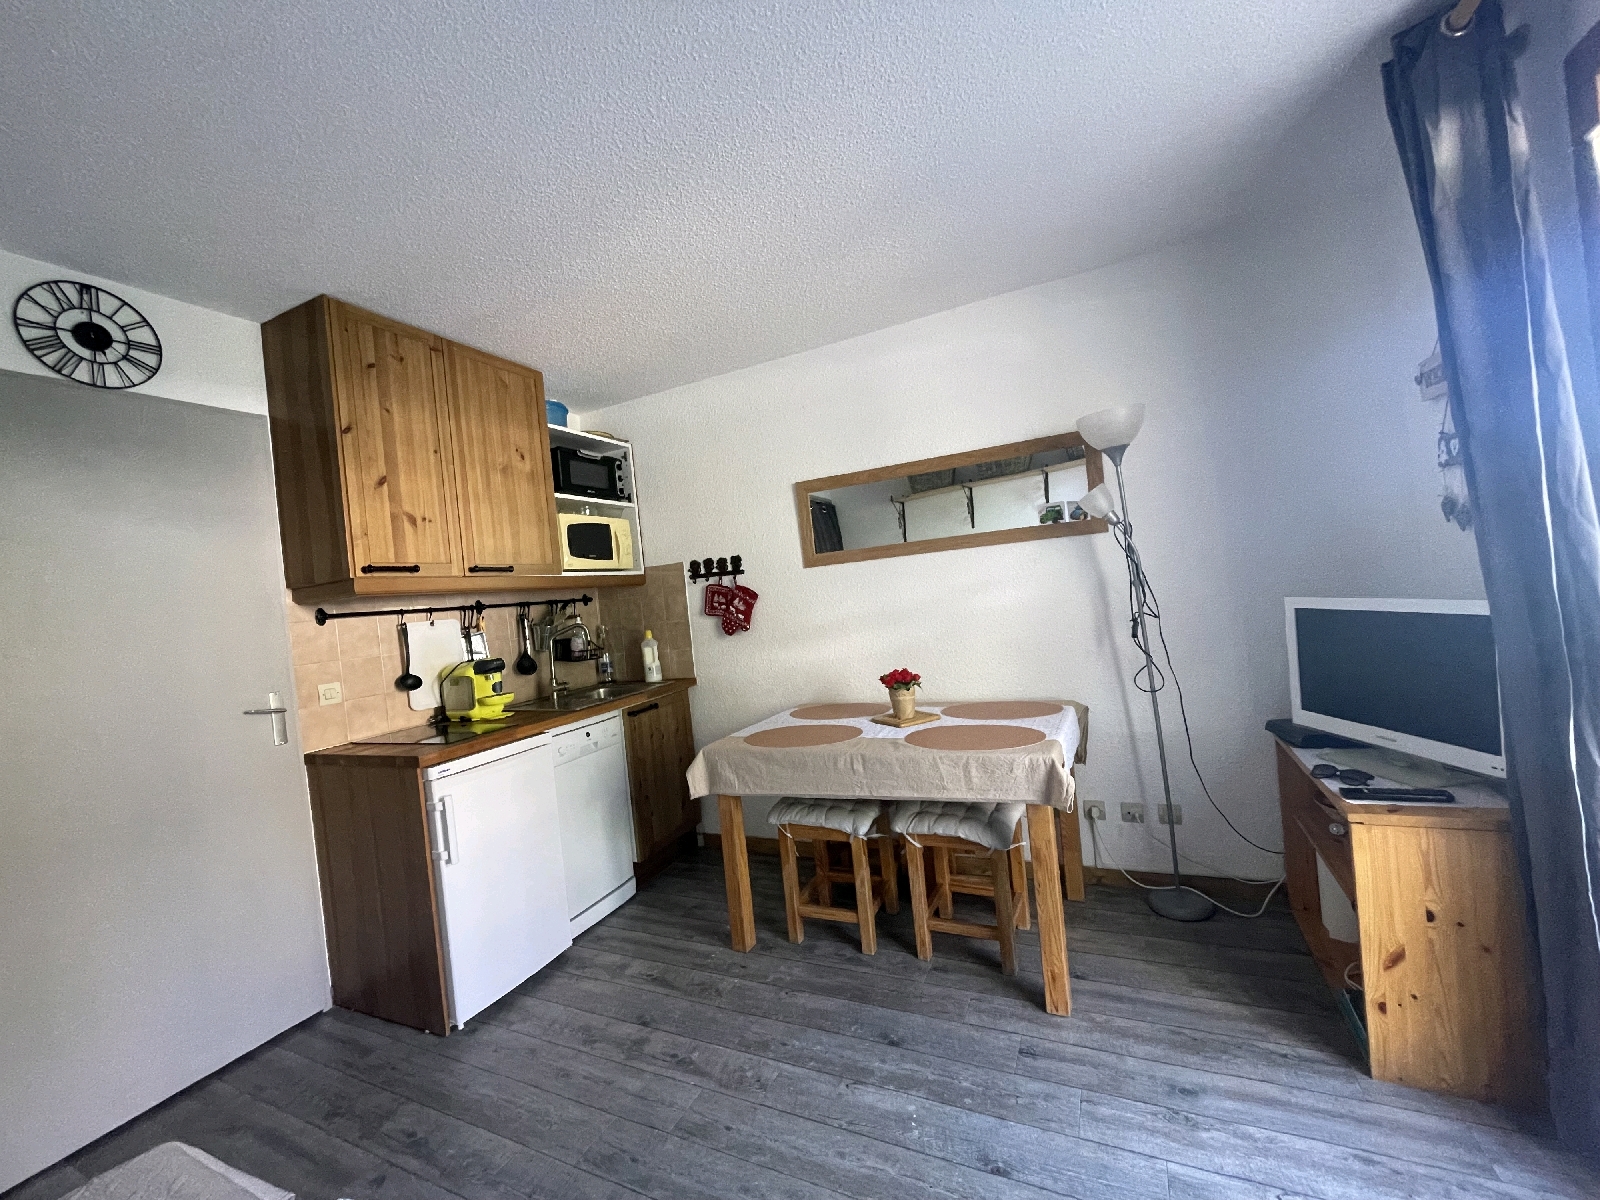 Apartment Close to Ski Chair Lift with Mountain View